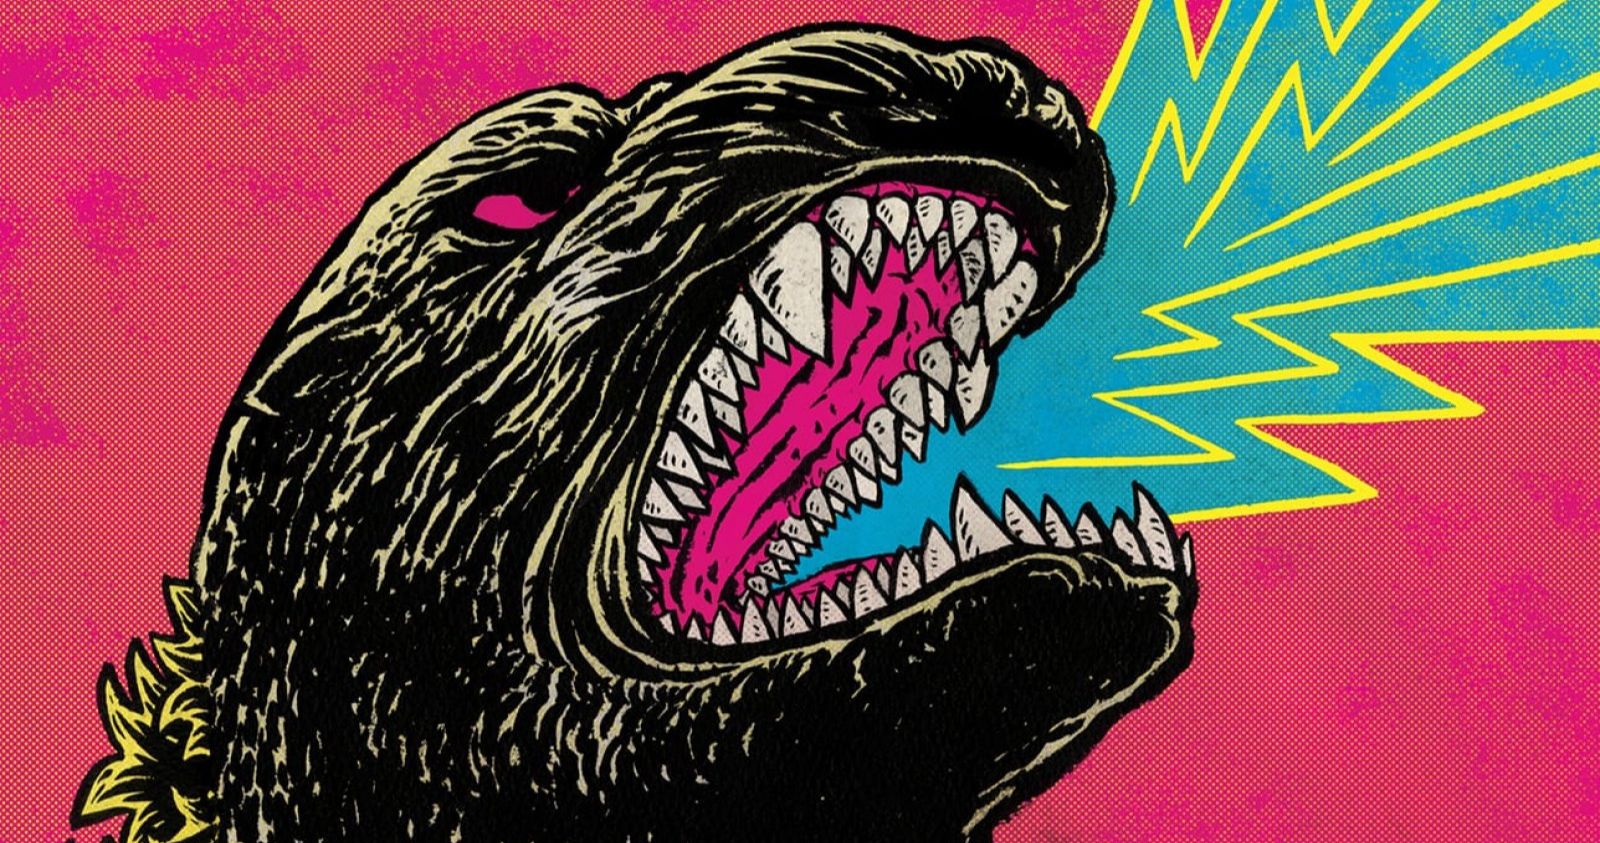 Criterion Collection's 1000th Release Celebrates with Godzilla in a 15-Film Set